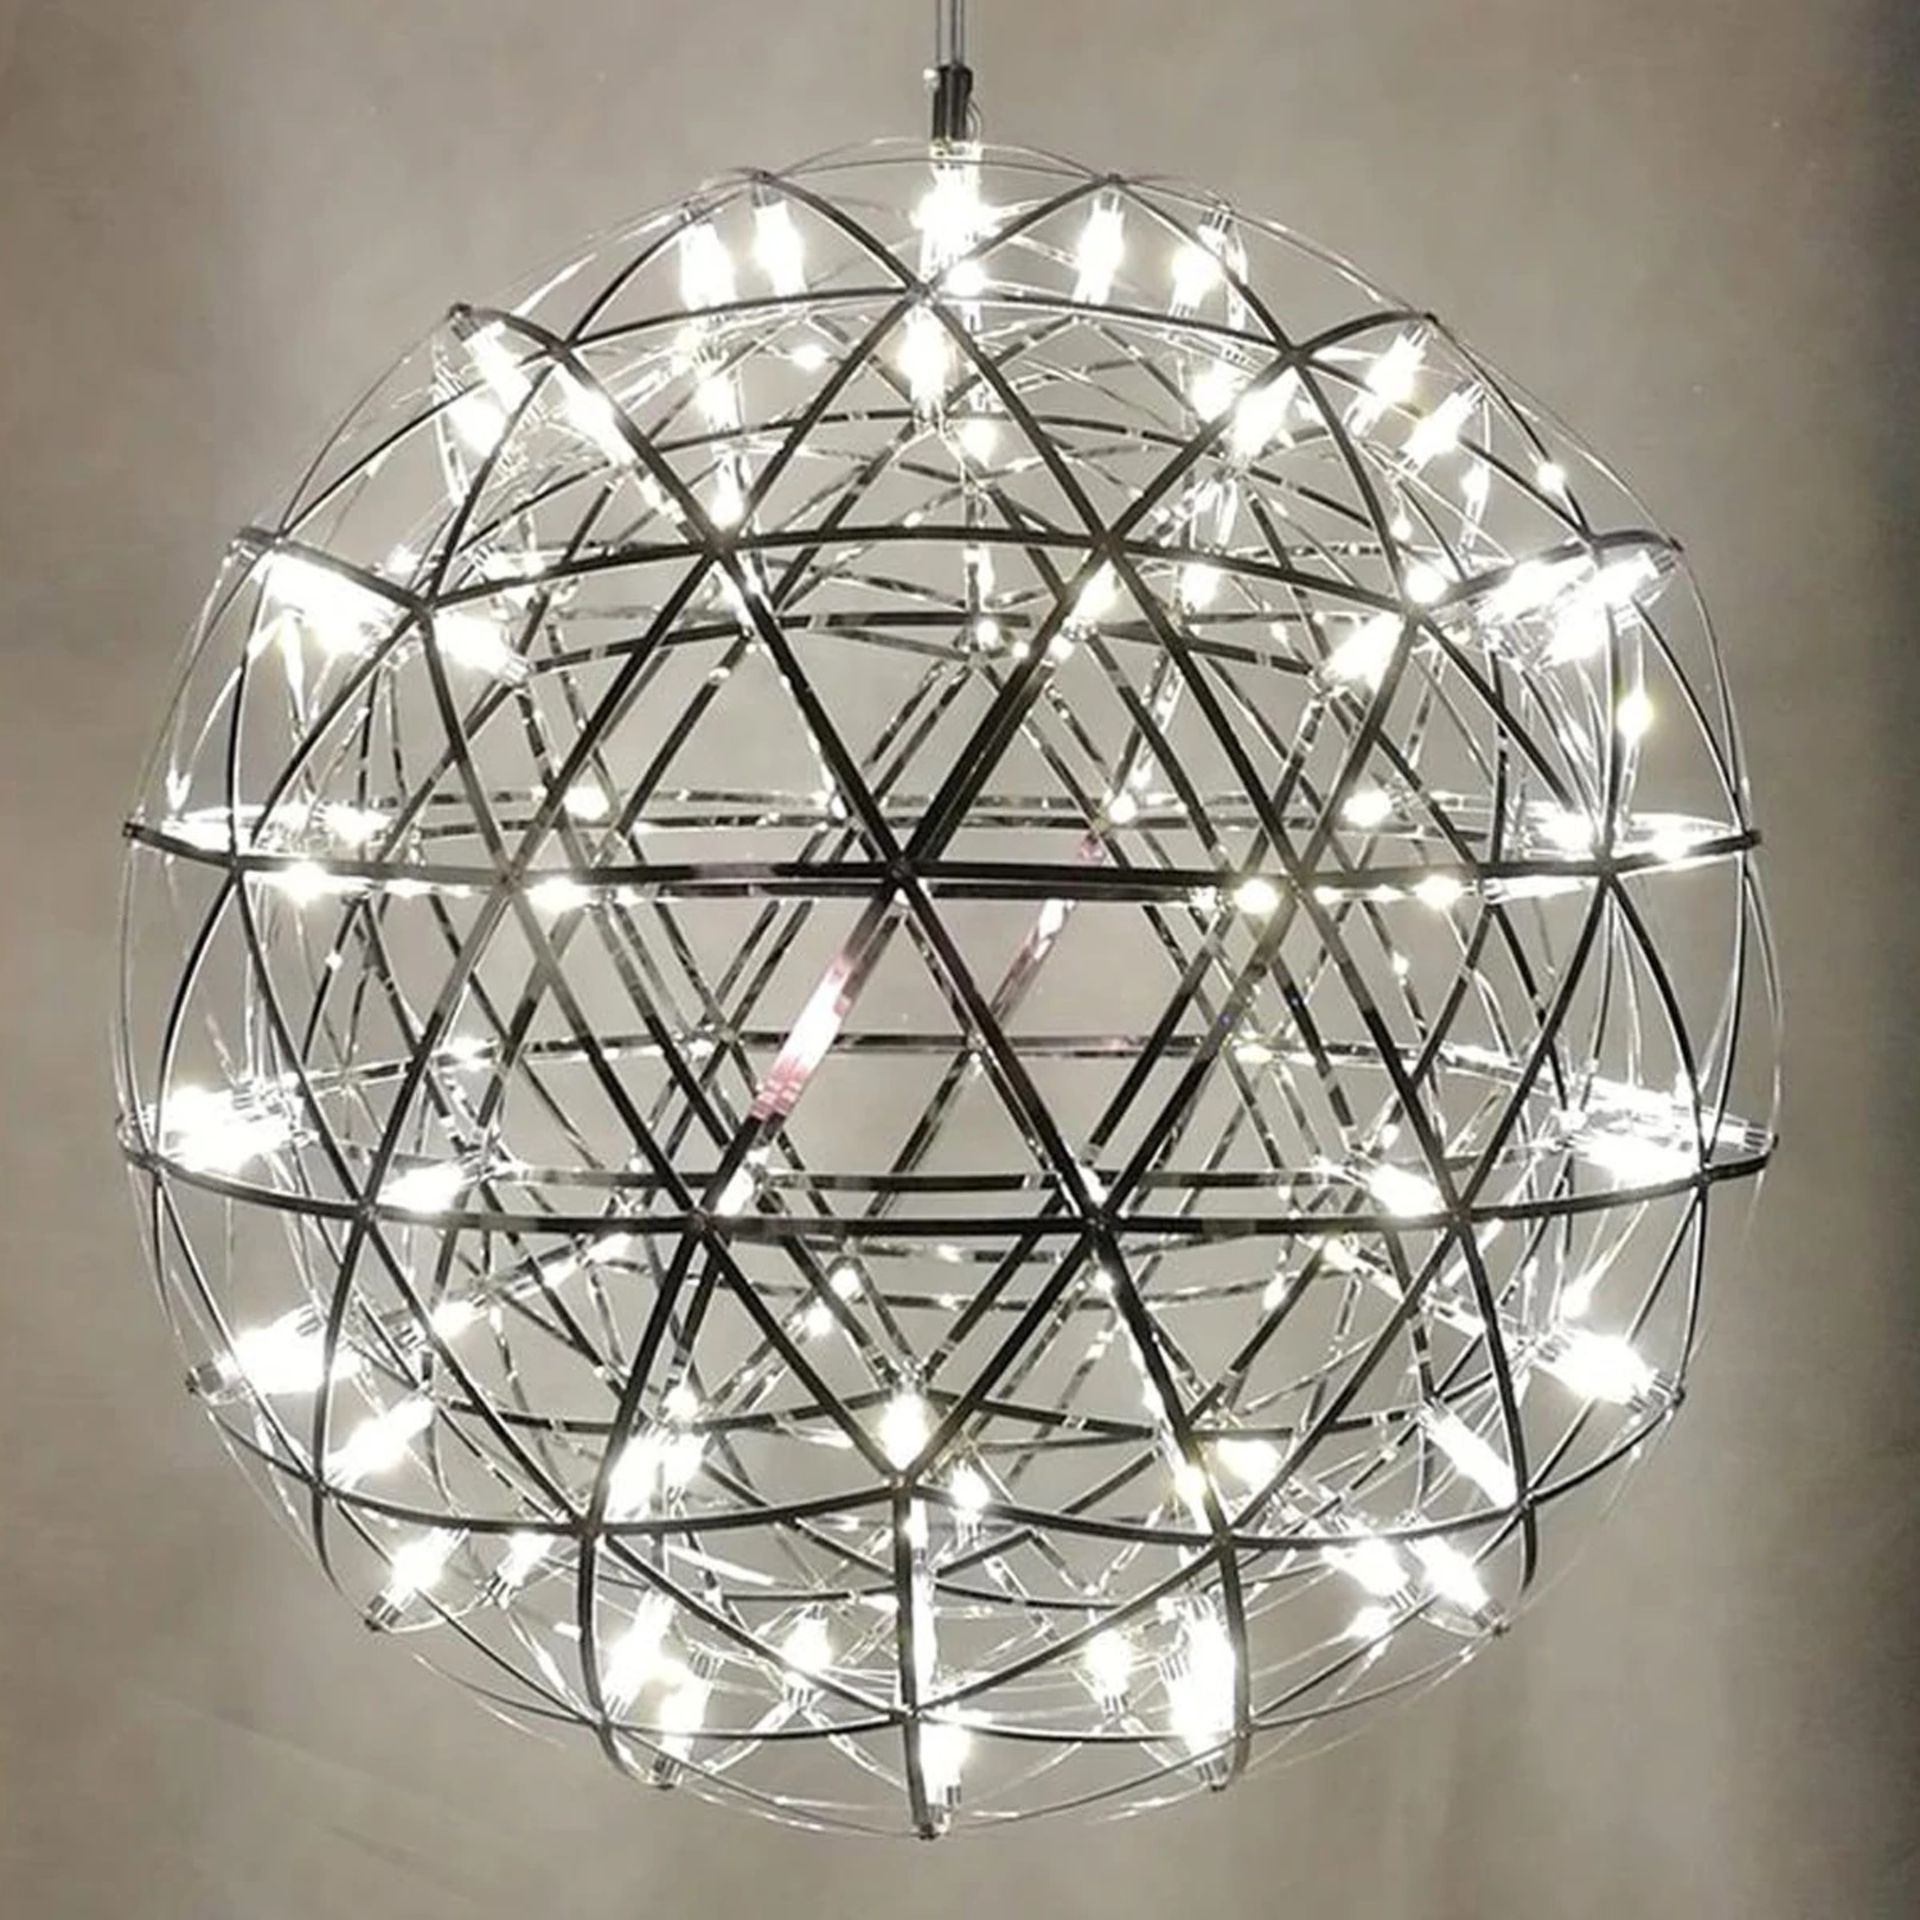 Starburst Small Hanging Pendant 20cm diameter x 18 lights with its chrome bodied spherical globe and - Image 2 of 3